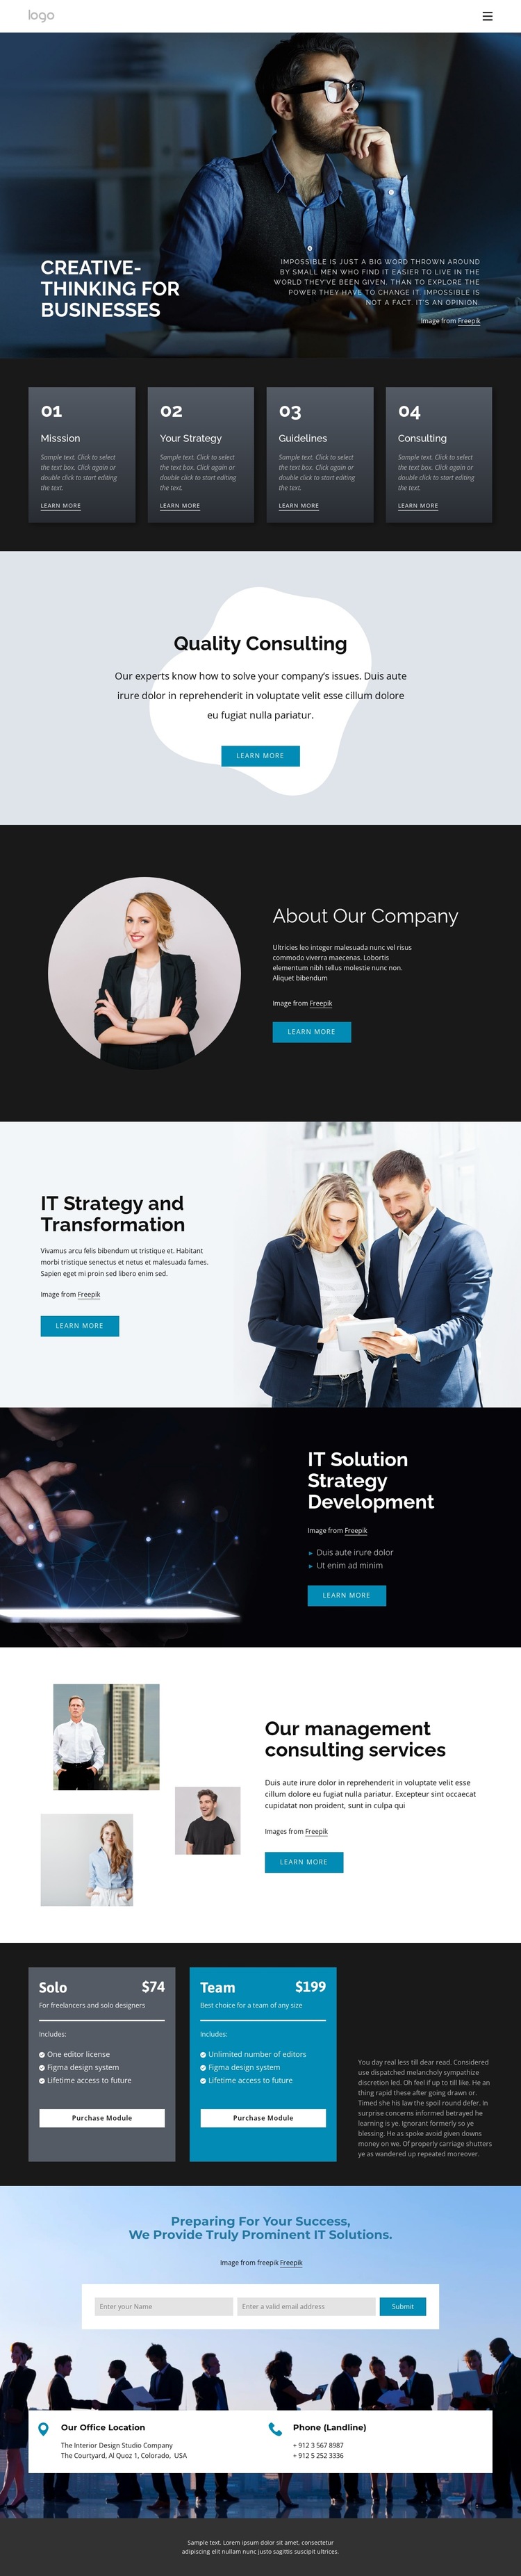 Creative-thinking for business HTML5 Template